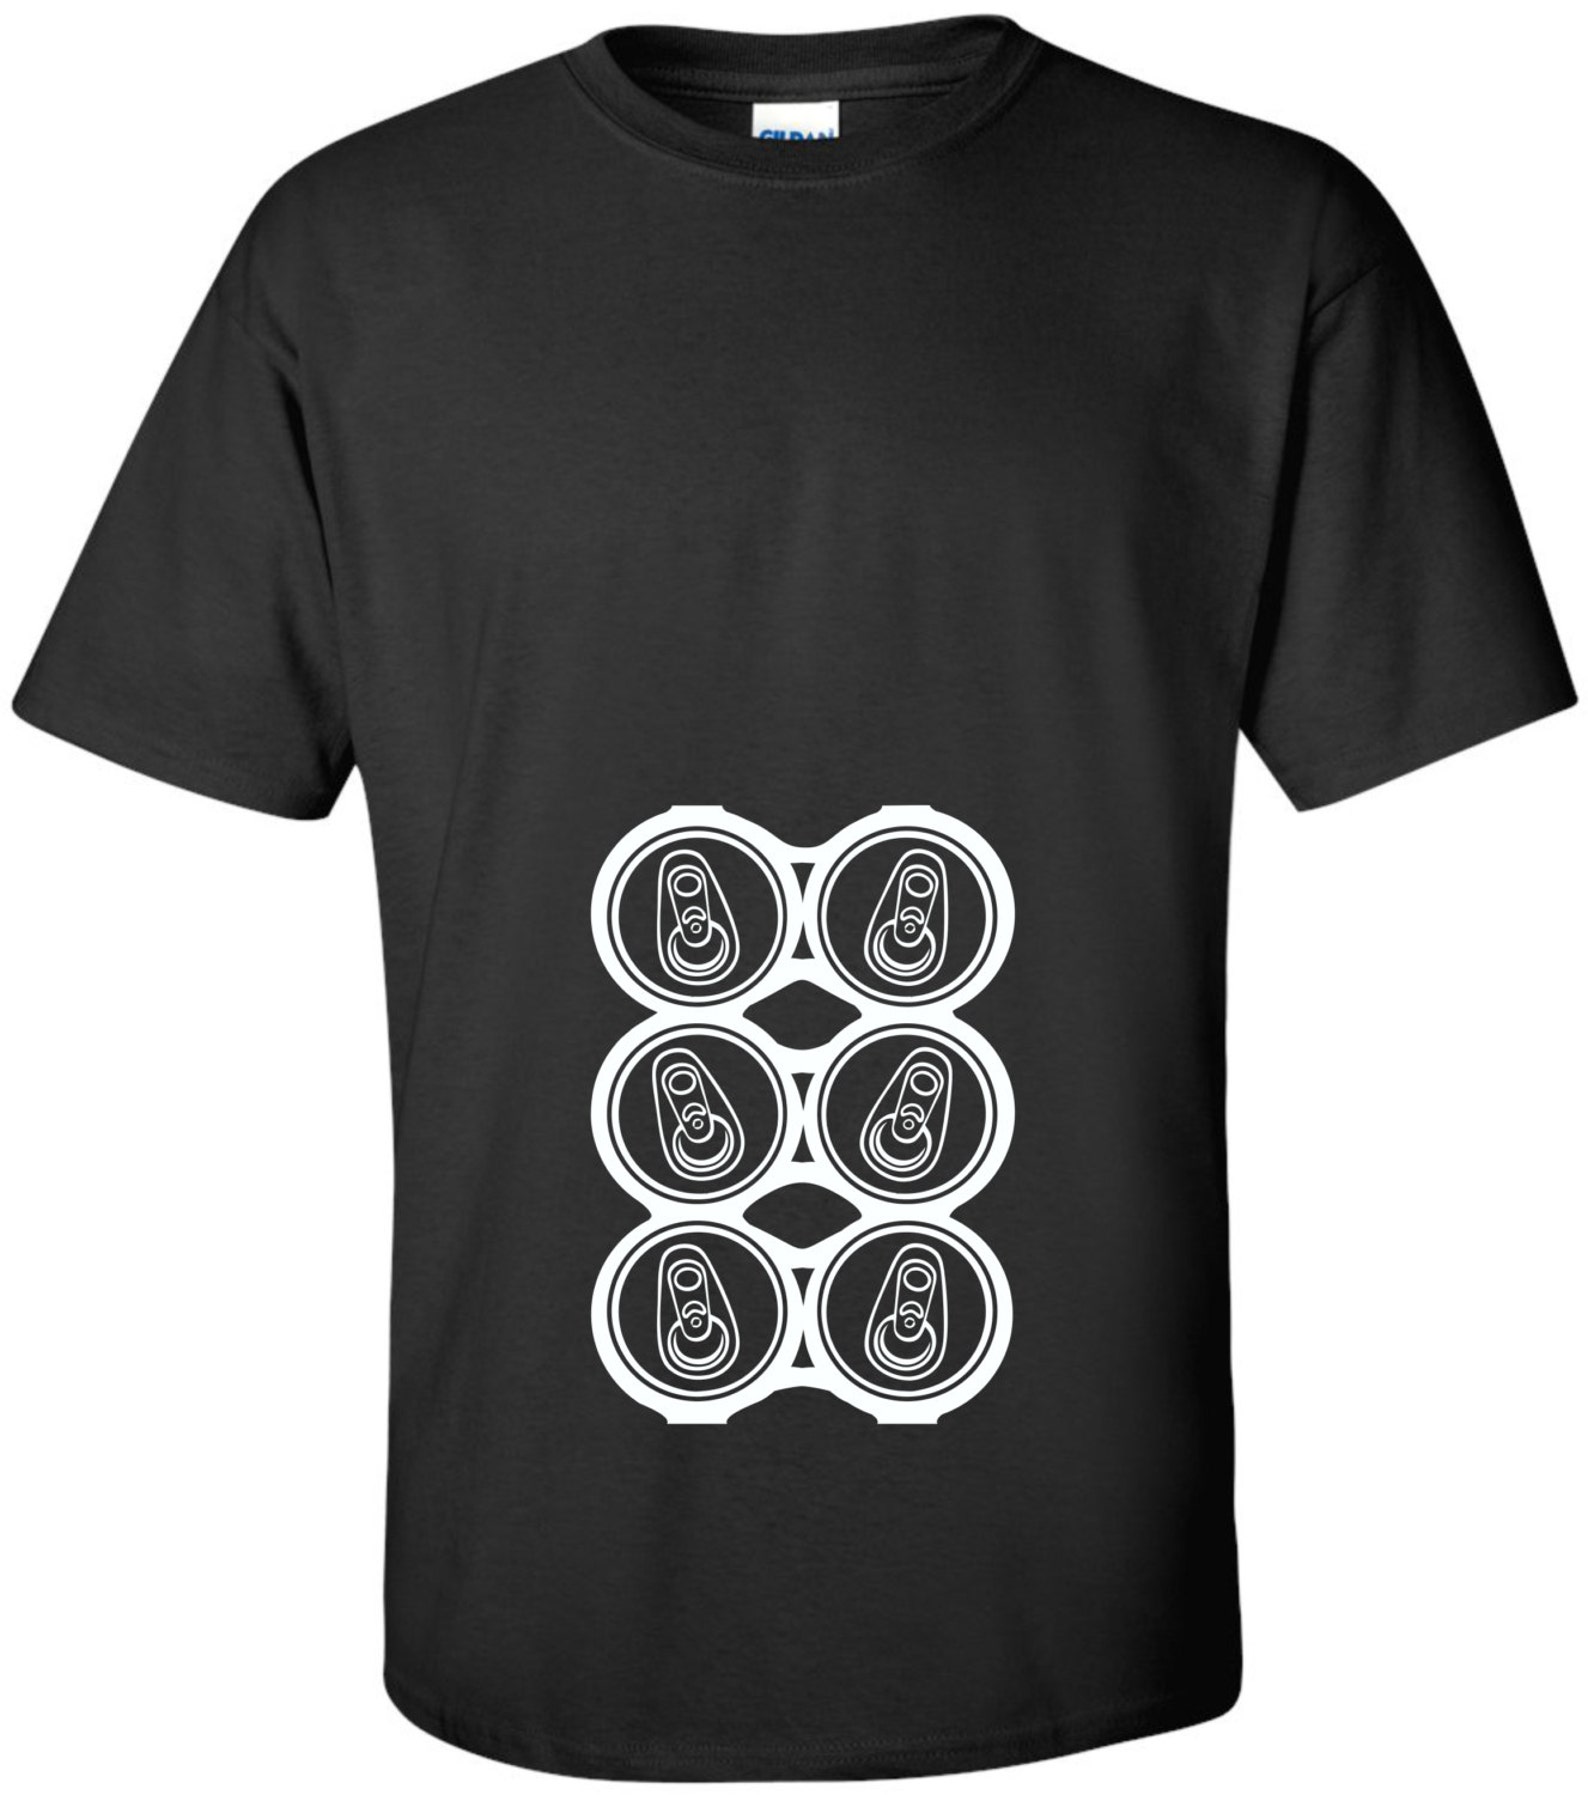 New six Pack Abs T-shirt Available in Sizes | Etsy